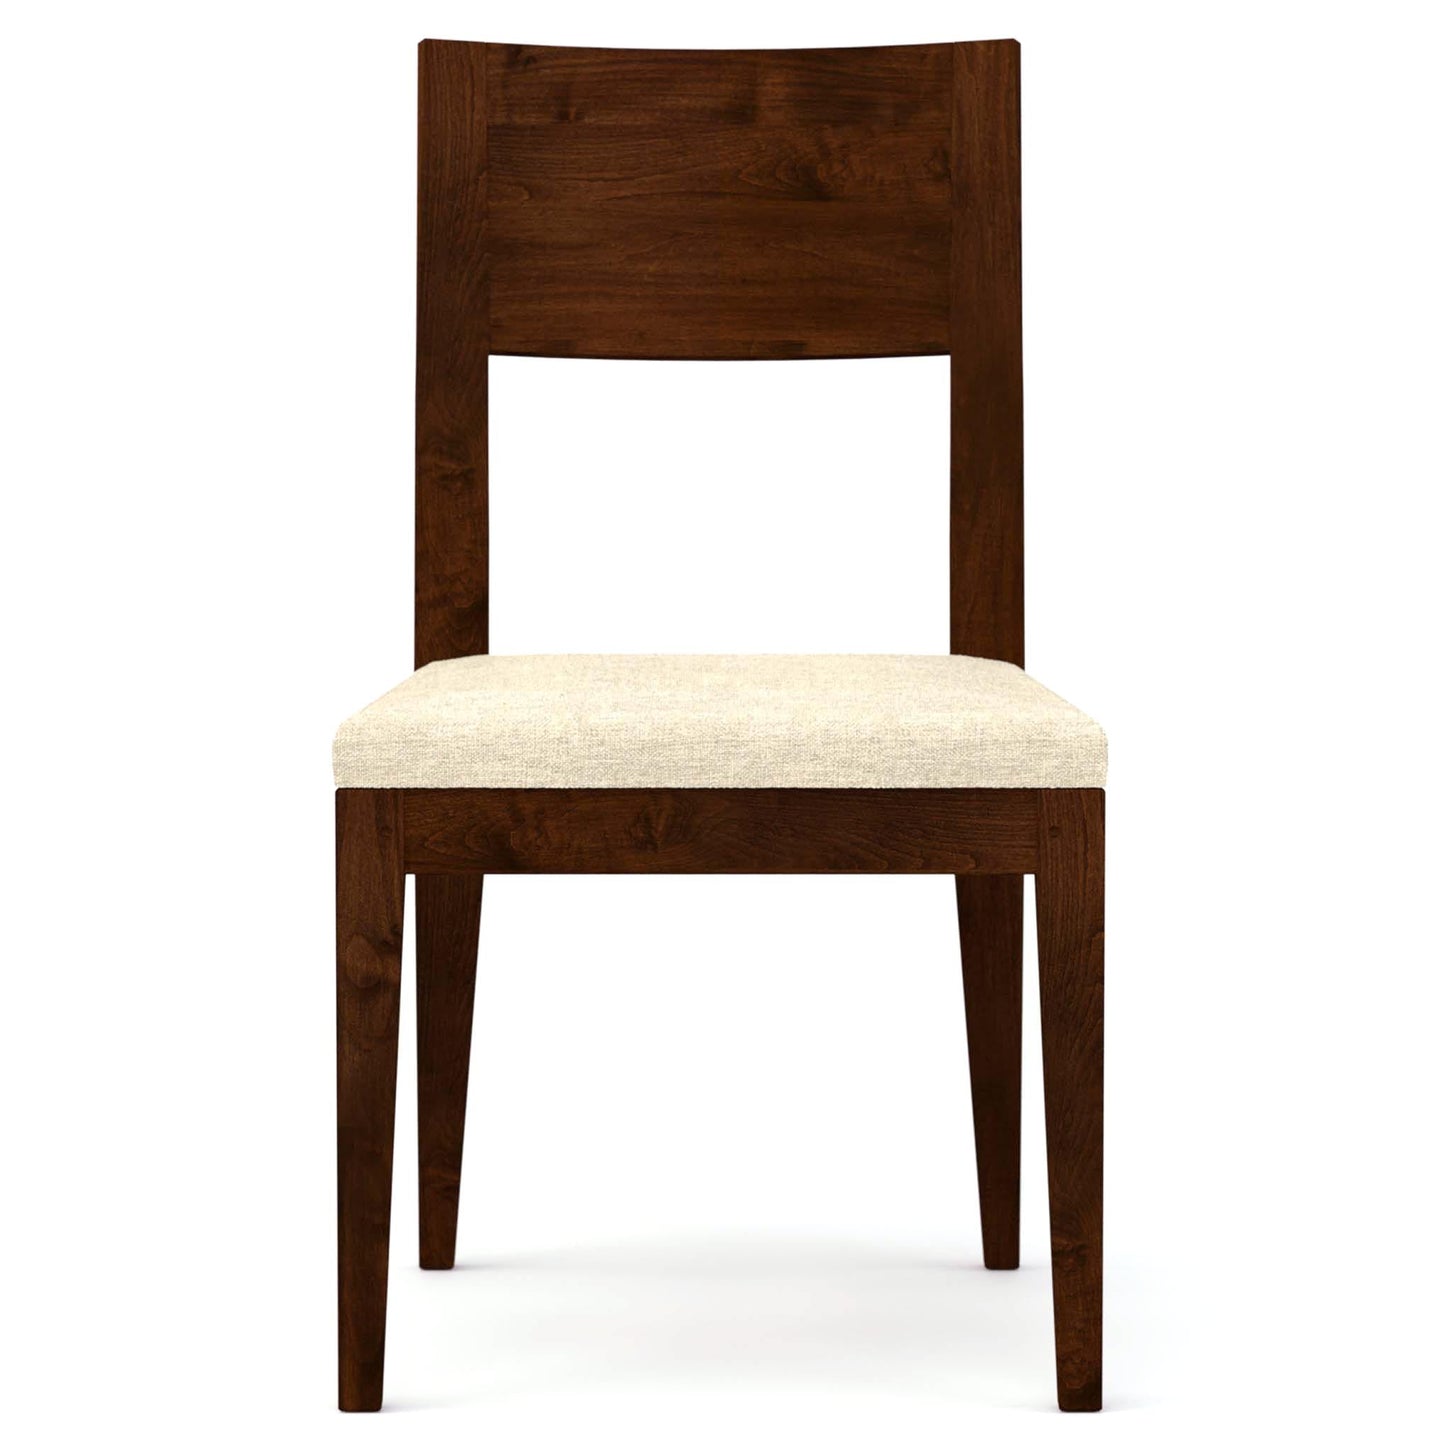 Dwyer Upholstered Side Chair